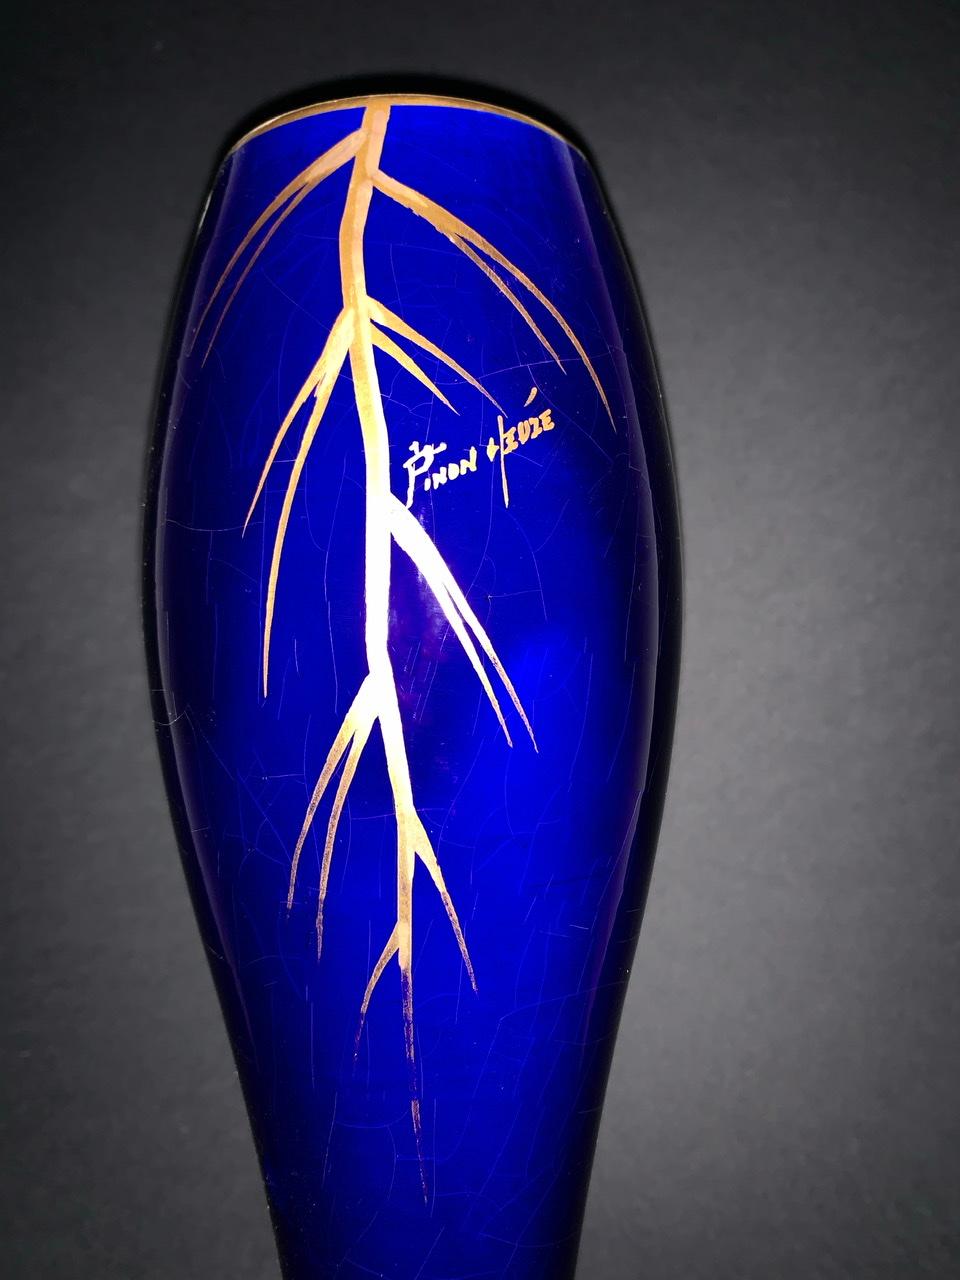 French Maurice Pinon Heuze - Pair of Blue and Gold Porcelain Vases Art Deco Circa 1920 For Sale